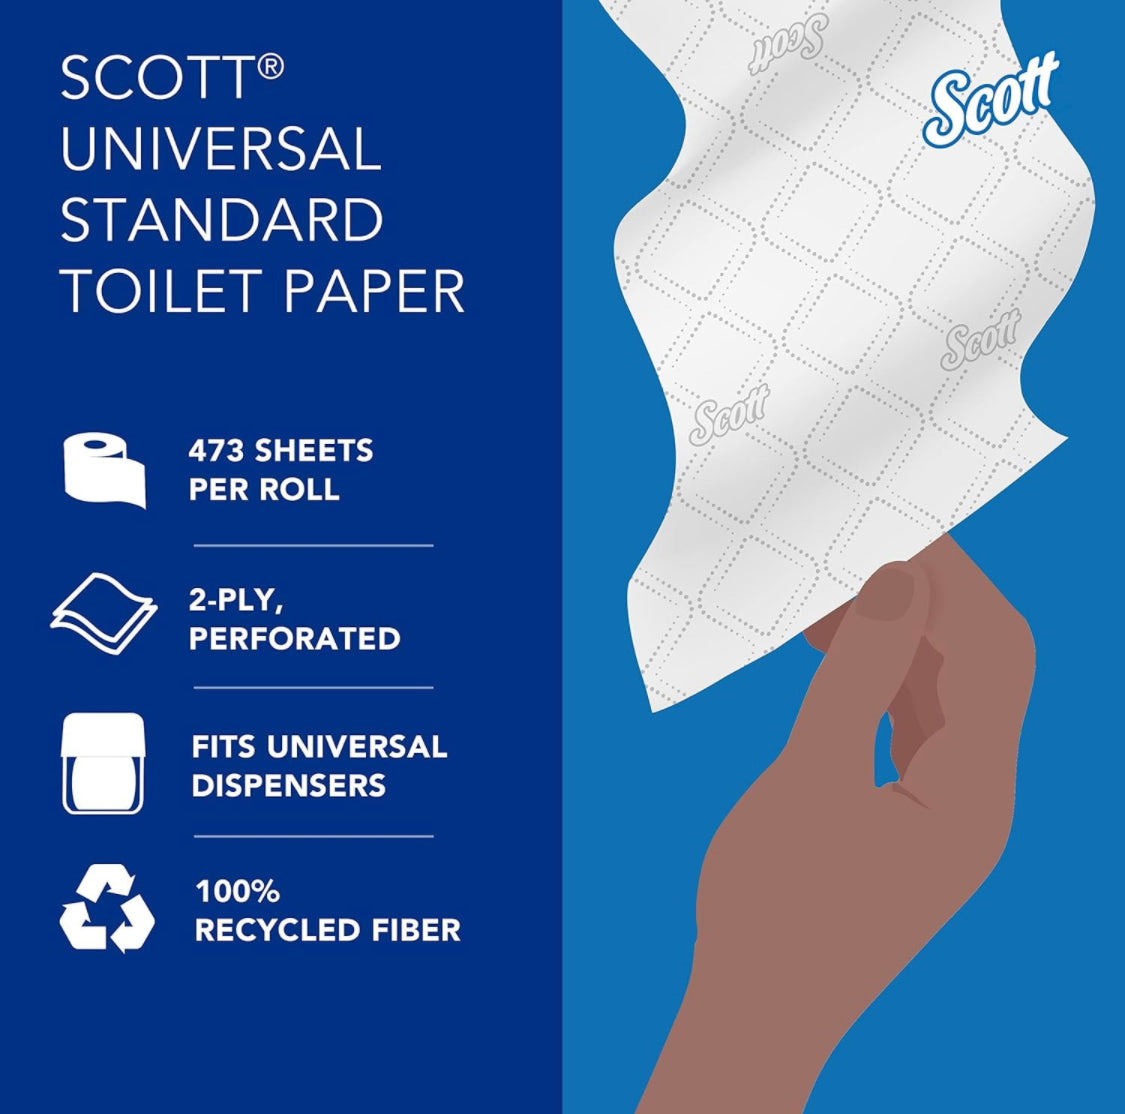 80 pack Scott® Professional 100% Recycled Fiber Standard Roll Toilet Paper (13217), with Elevated Design, 2-Ply, White, Individually wrapped rolls, 473 Count (Pack of 80), Total 37,840 Sheets